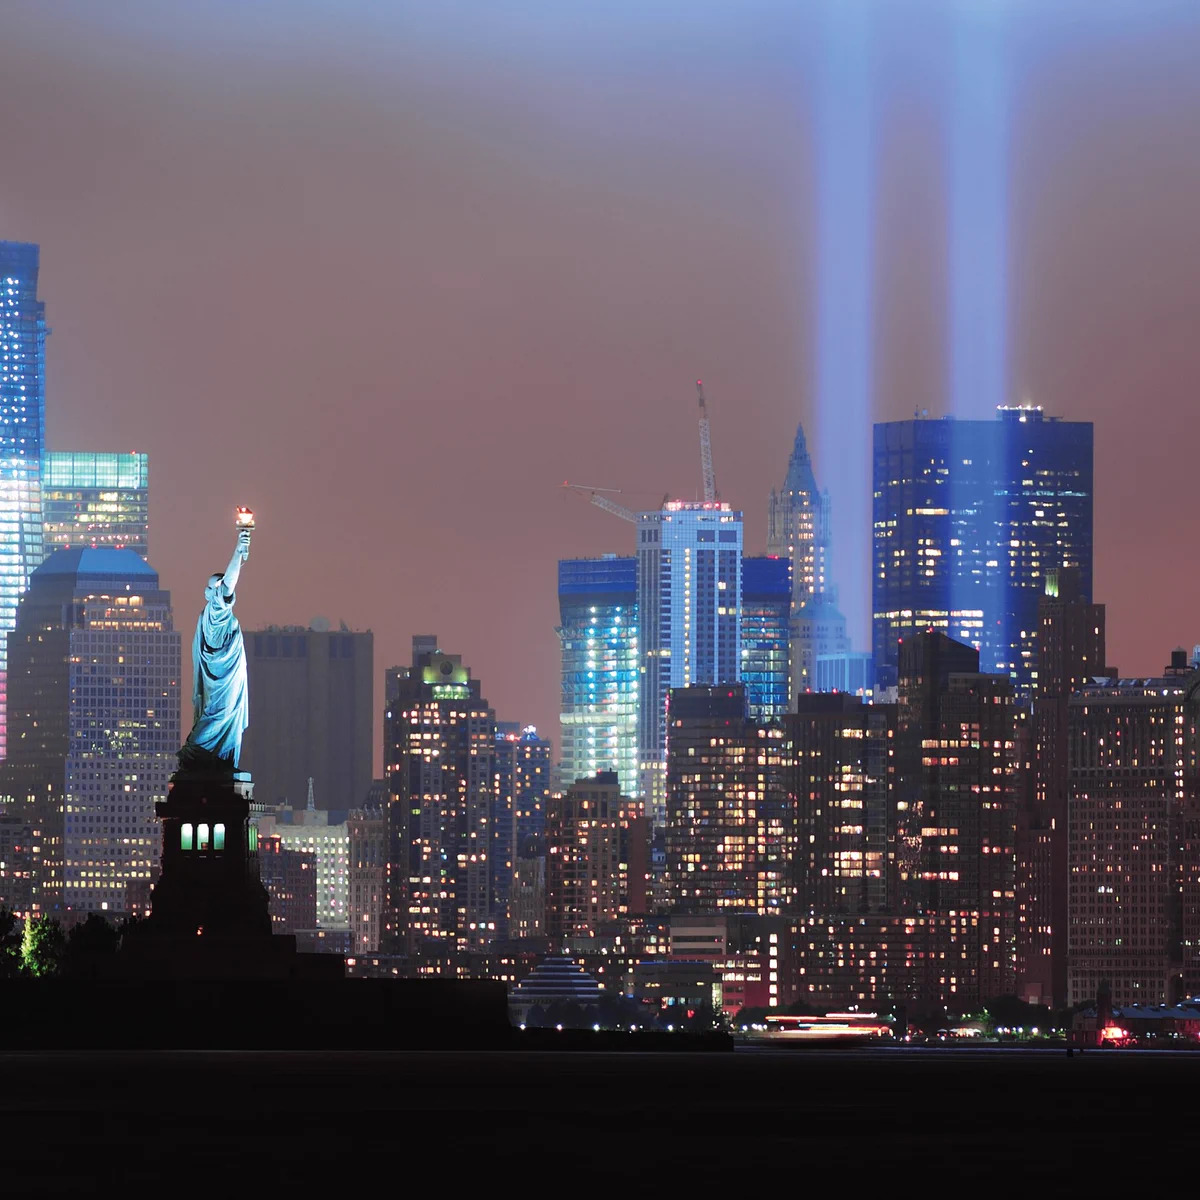 Statement from Speaker Adams on the 22nd Anniversary of the September 11th Attacks